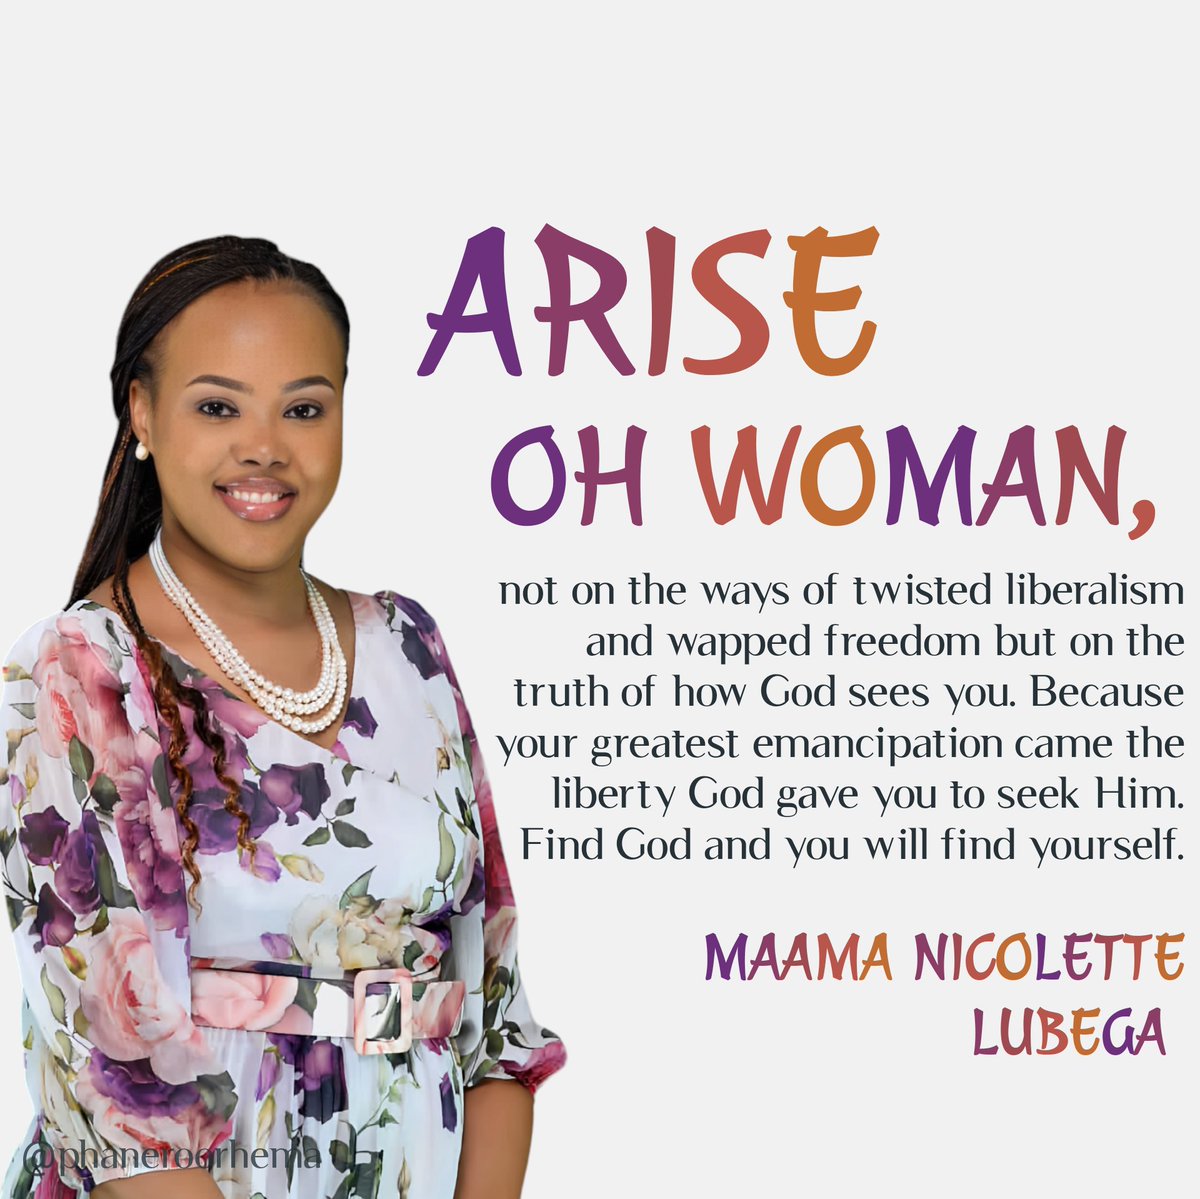 Arise Oh Woman, not on the ways of twisted liberalism and wapped freedom but on the truth of how God sees you. Your greatest emancipation came the liberty God gave you to seek Him. Find God and you will find yourself. Maama Nicolette Lubega #PhanerooRhema #MyGreatPrice2024